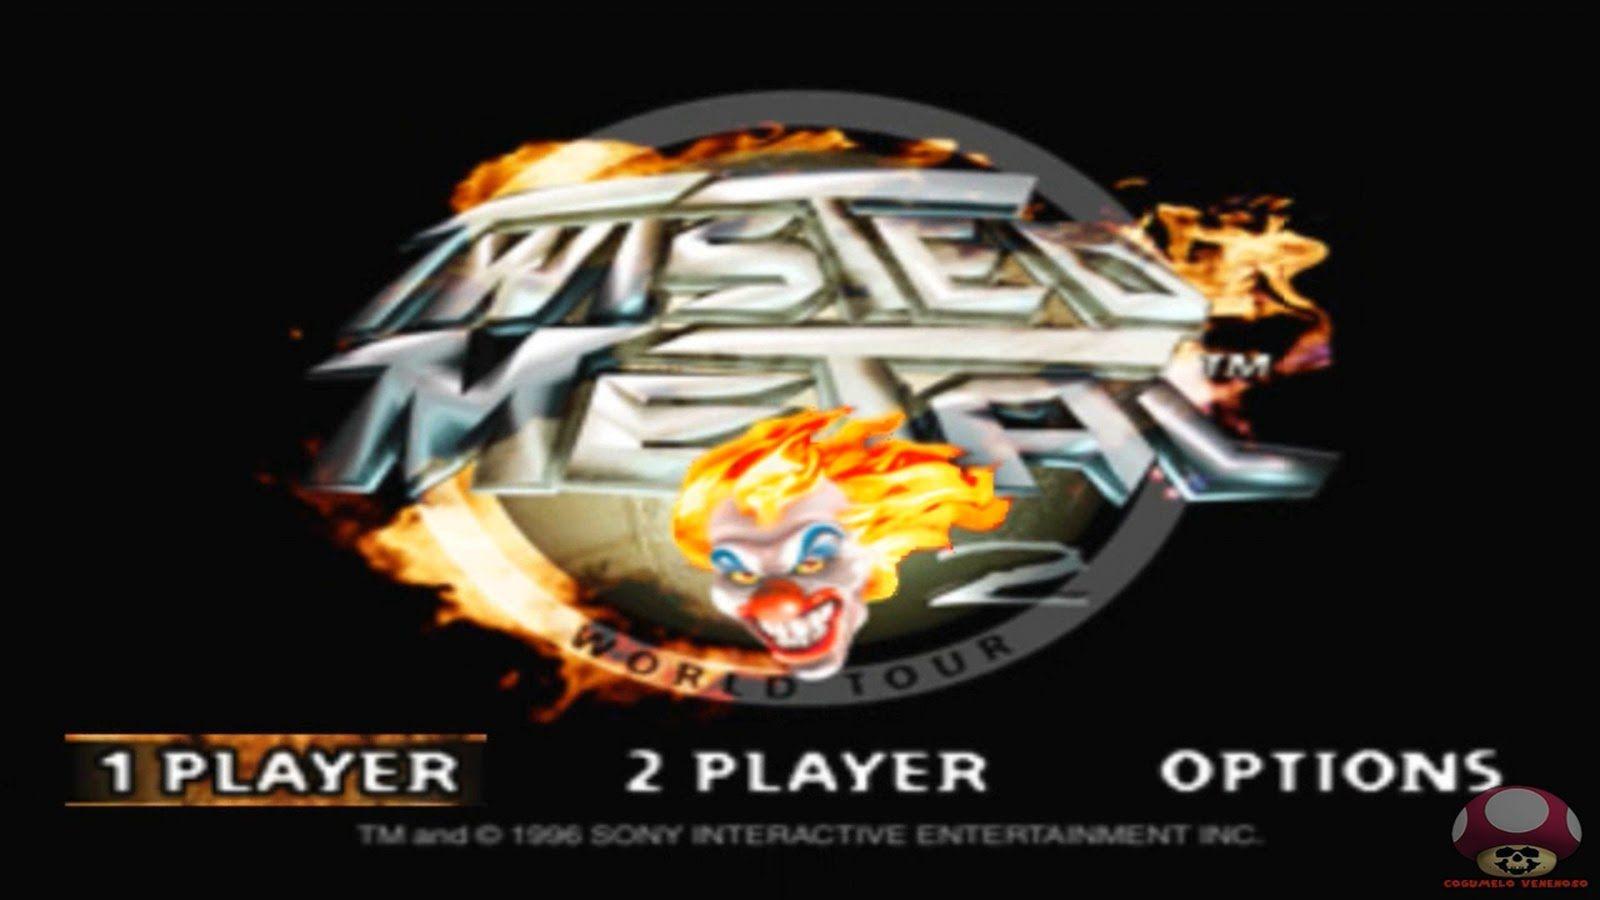 Twisted Metal 2 (Playstation): Intro